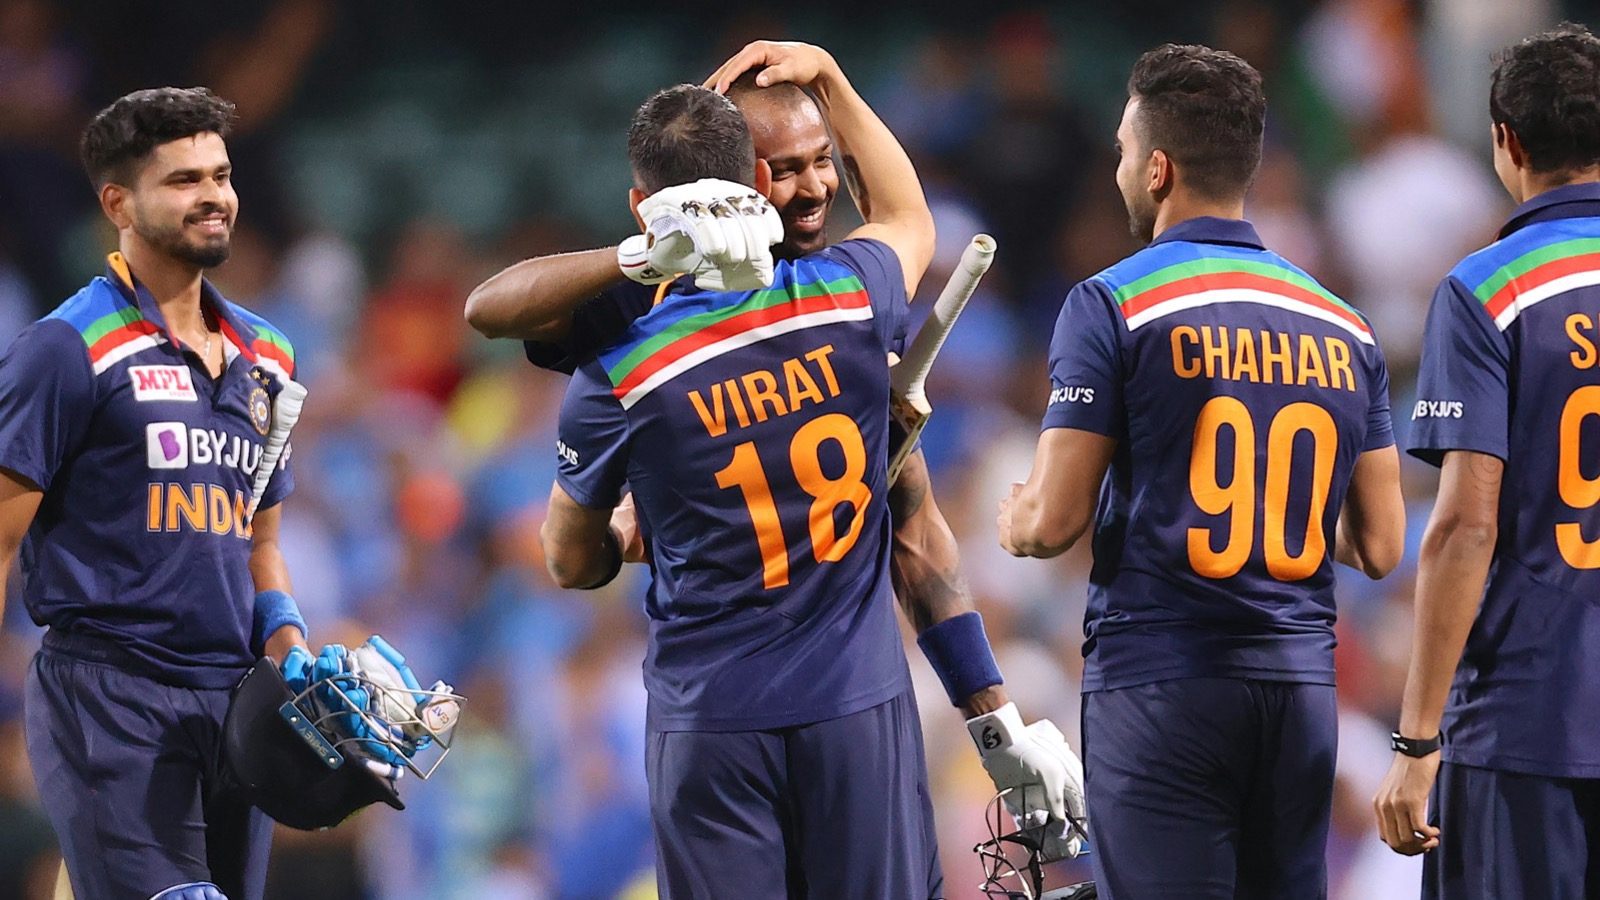 Indian cricket jersey: History in shades of blue